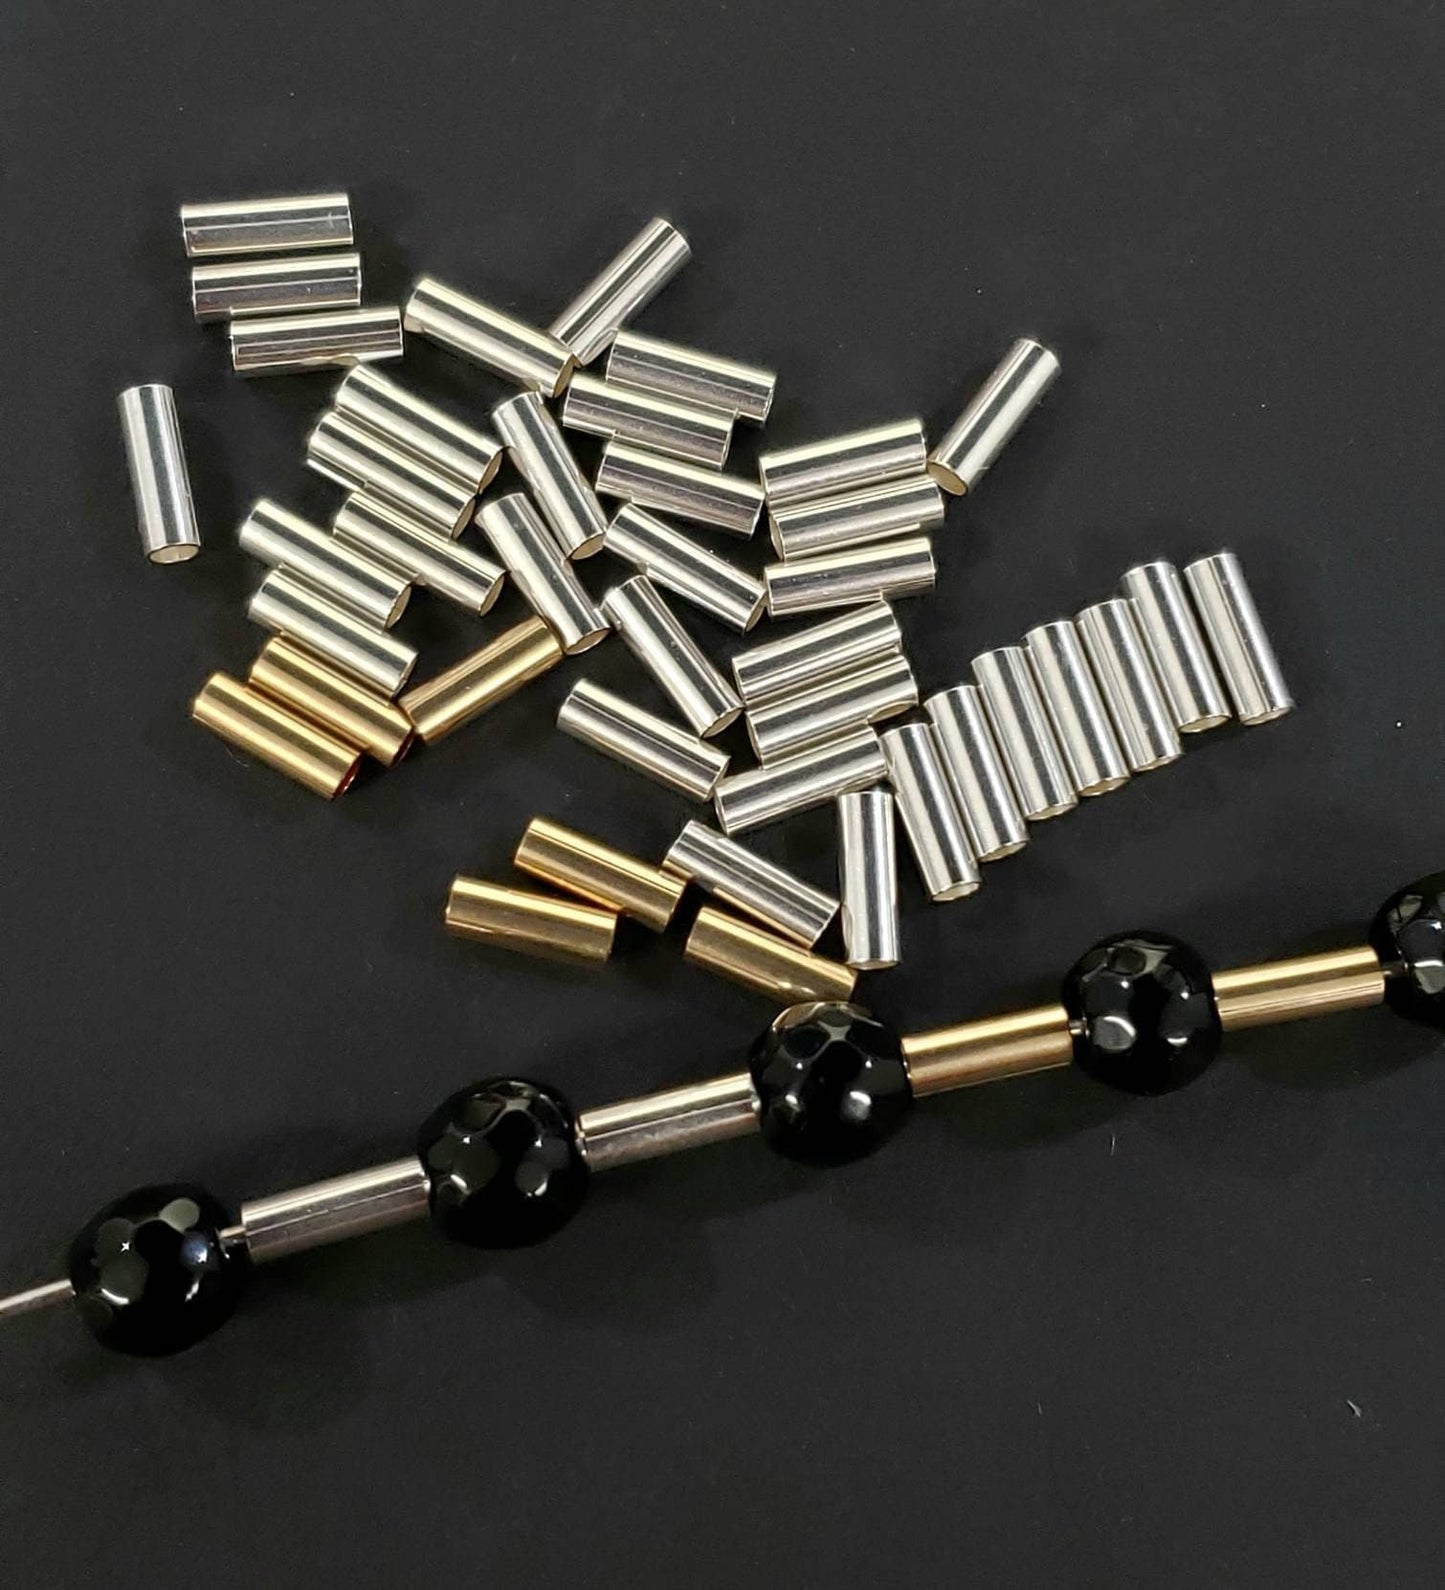 925 Sterling Silver 2x6mm liquid Silver tube and 14k Gold filled tube Spacer ,Made in USA, high quality jewelry making supplies.10, 20 pcs